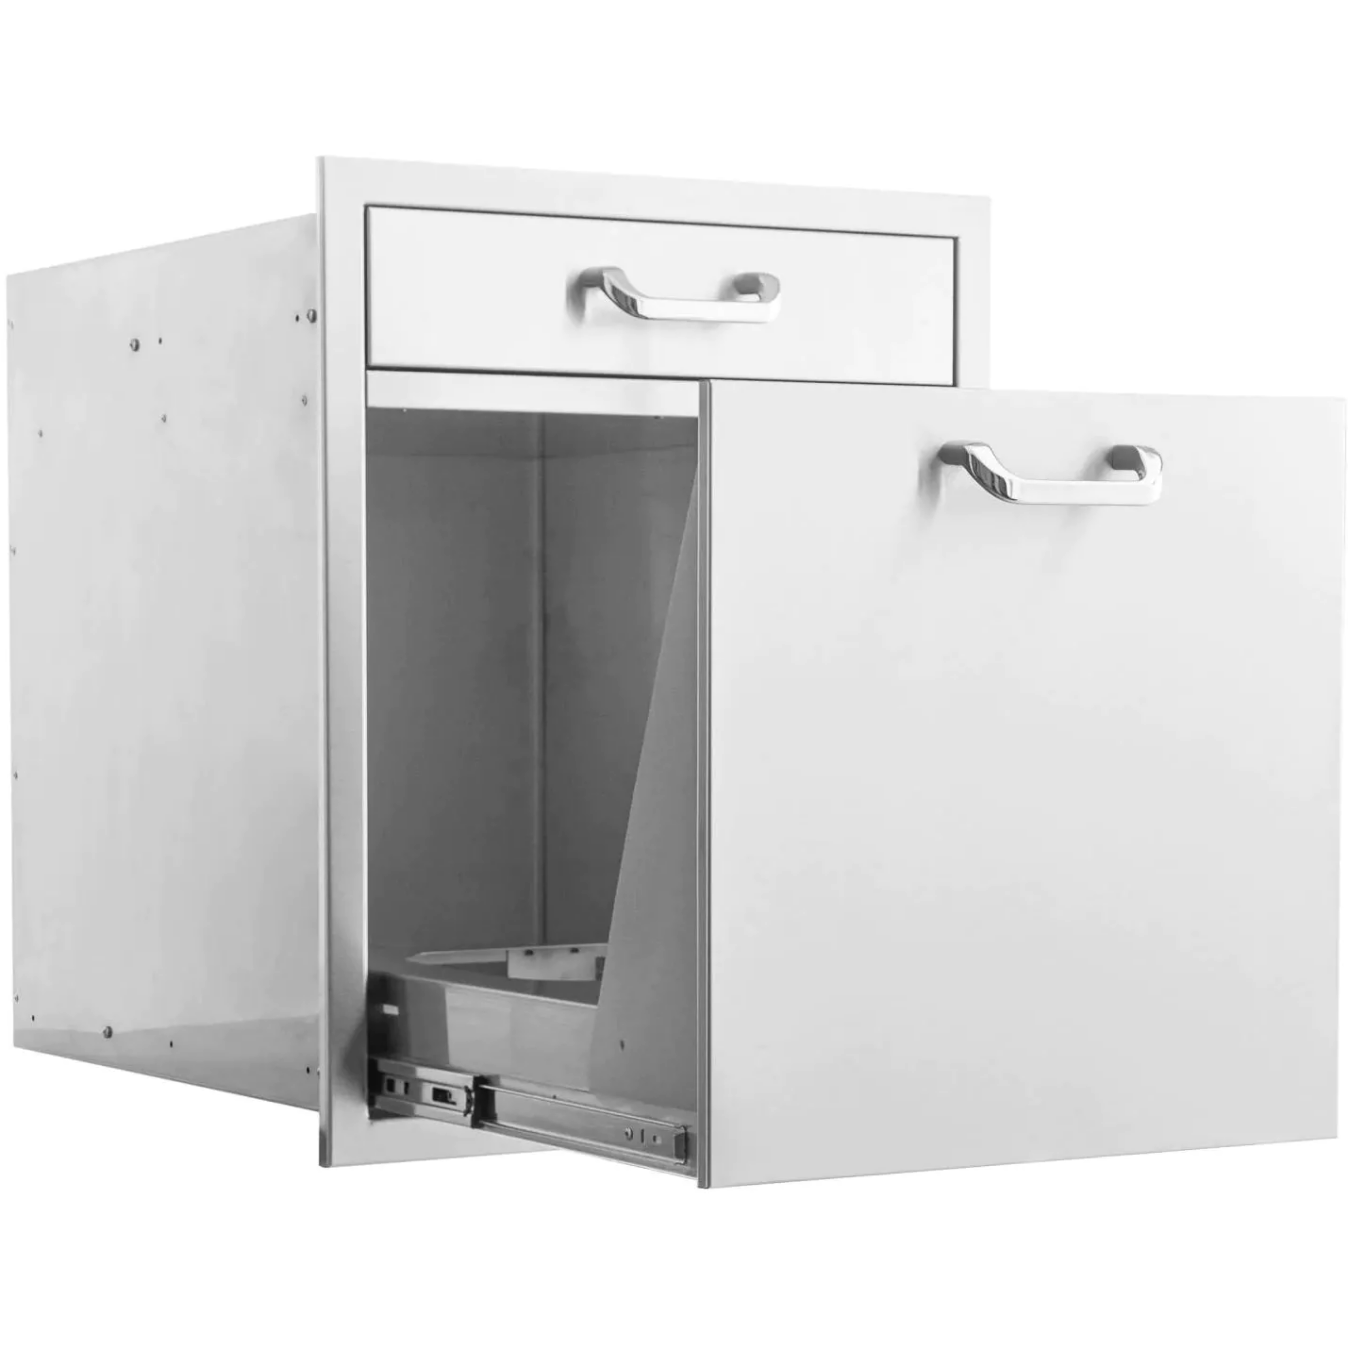 PCM 260 Series 20" Stainless Steel Single Drawer With Roll-Out Trash & Recycling Bin Combo